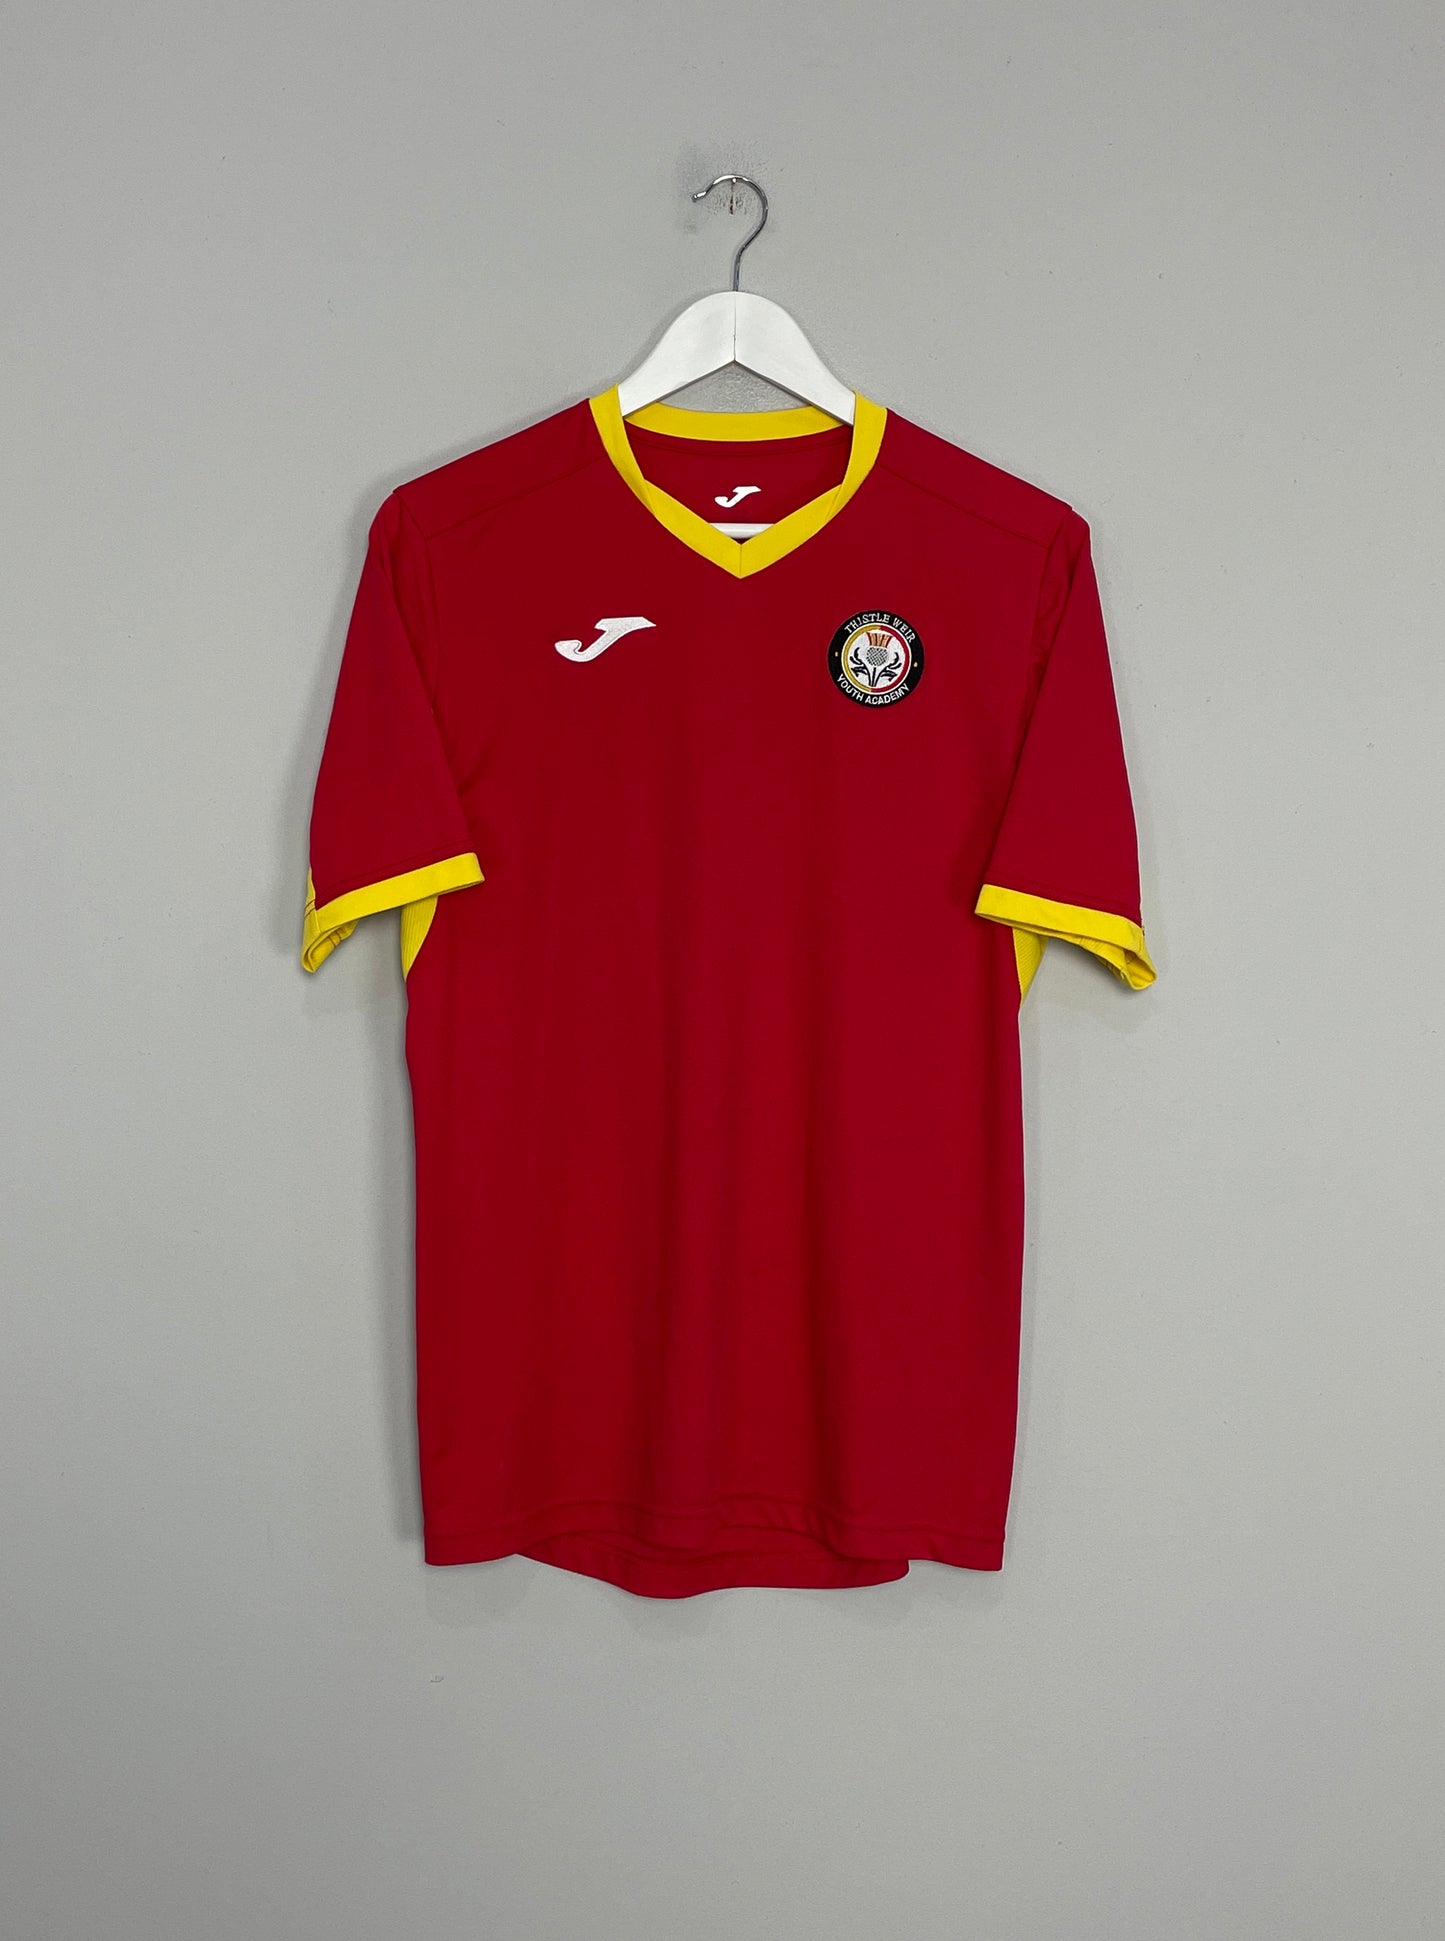 2018/19 THISTLE WEIR YOUTH TRAINING (M) JOMA